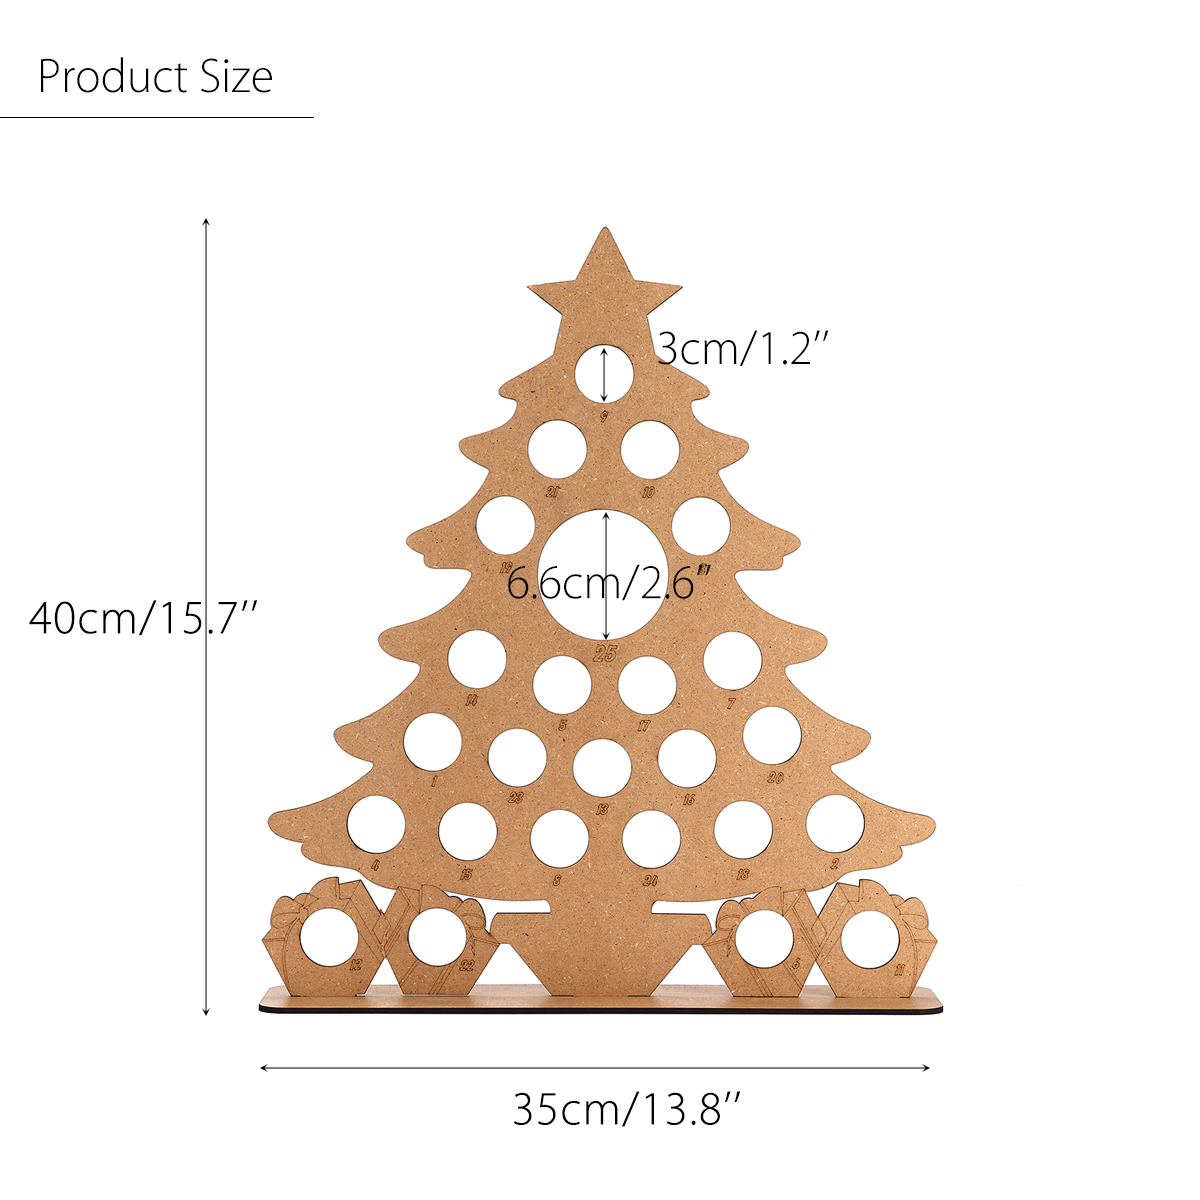 Wooden-Christmas-Advent-Calendar-Christmas-Tree-Decoration-Fits-25-Circular-Chocolates-Candy-Stand-R-1587861-4